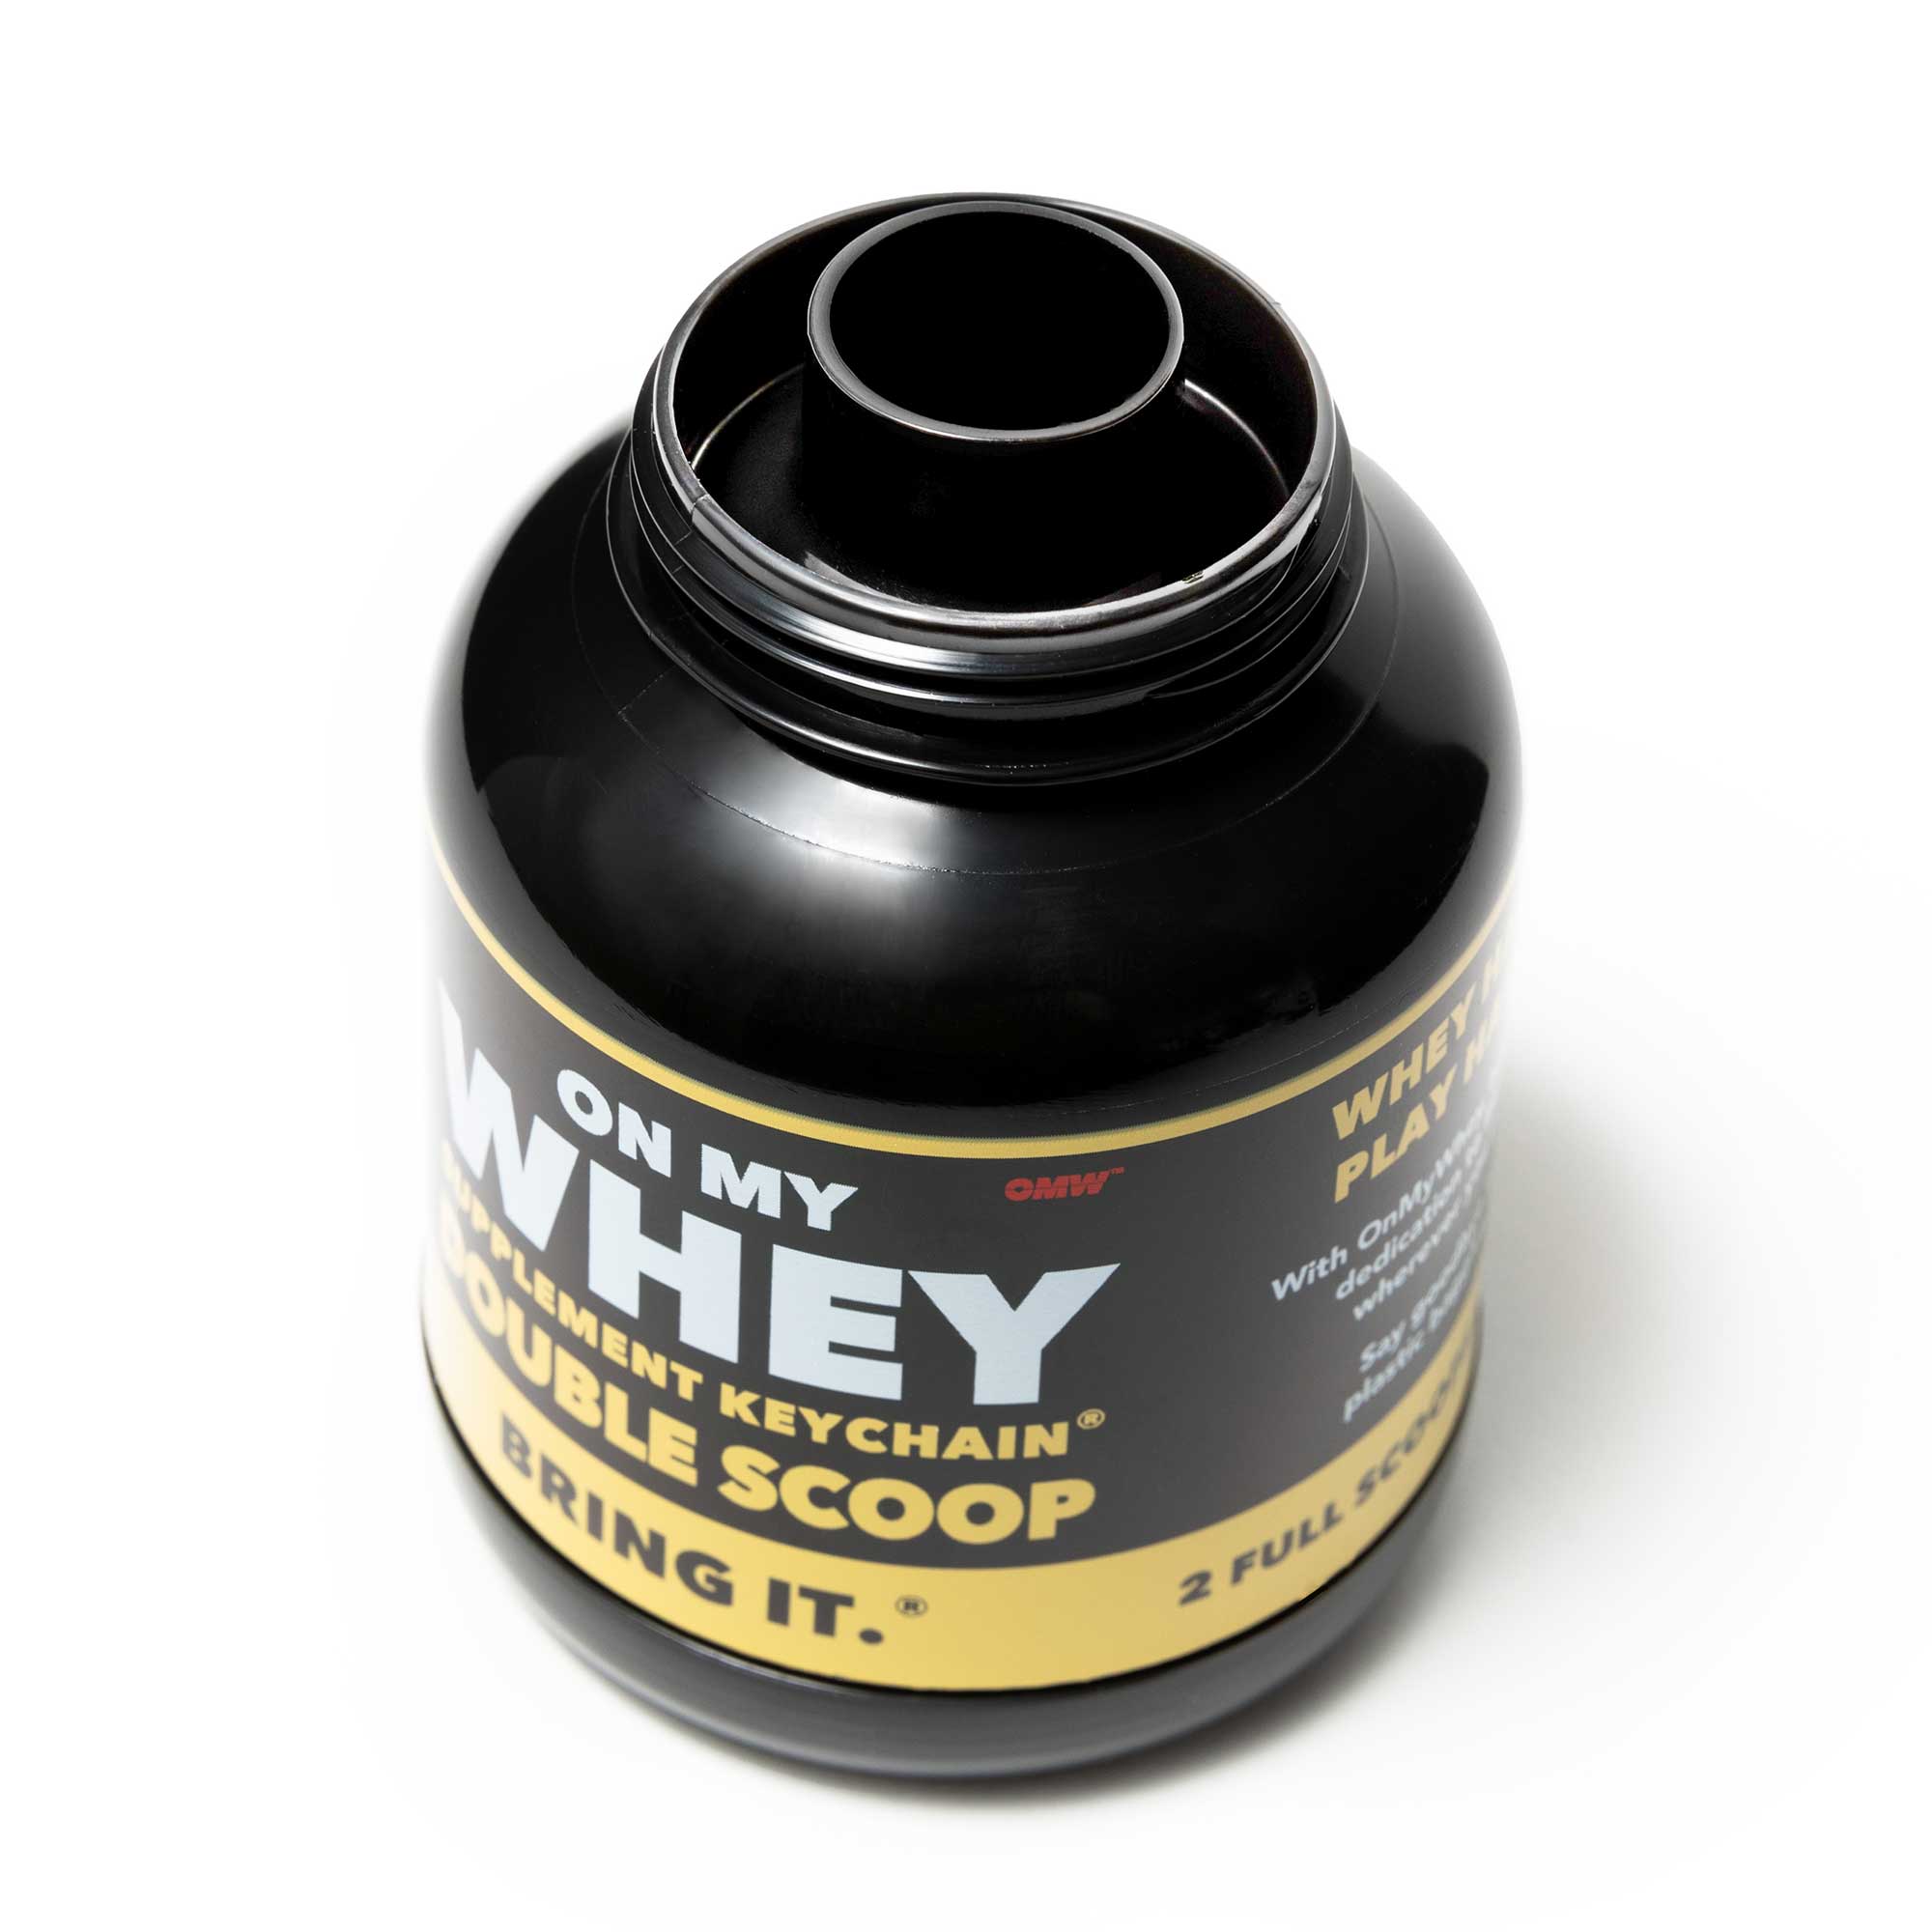  OnMyWhey - Double Scoop (180cc) - Protein Powder and